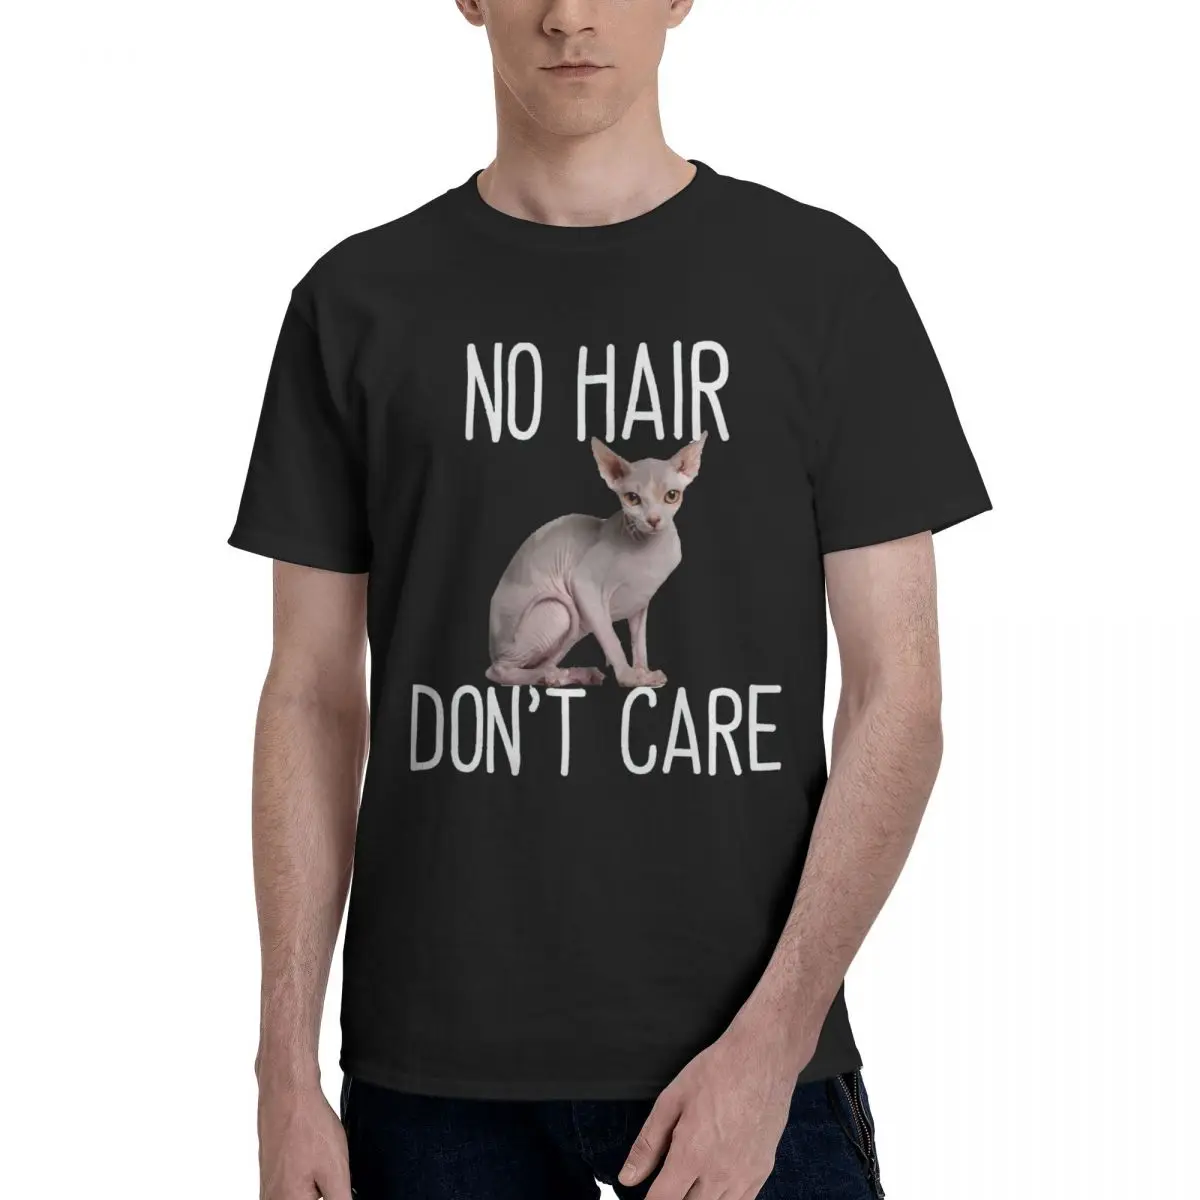 Sphynx Canadian Hairless ELF Cat Original TShirts No Hair Not Care Personalize Homme T Shirt Hipster Tops 6XL